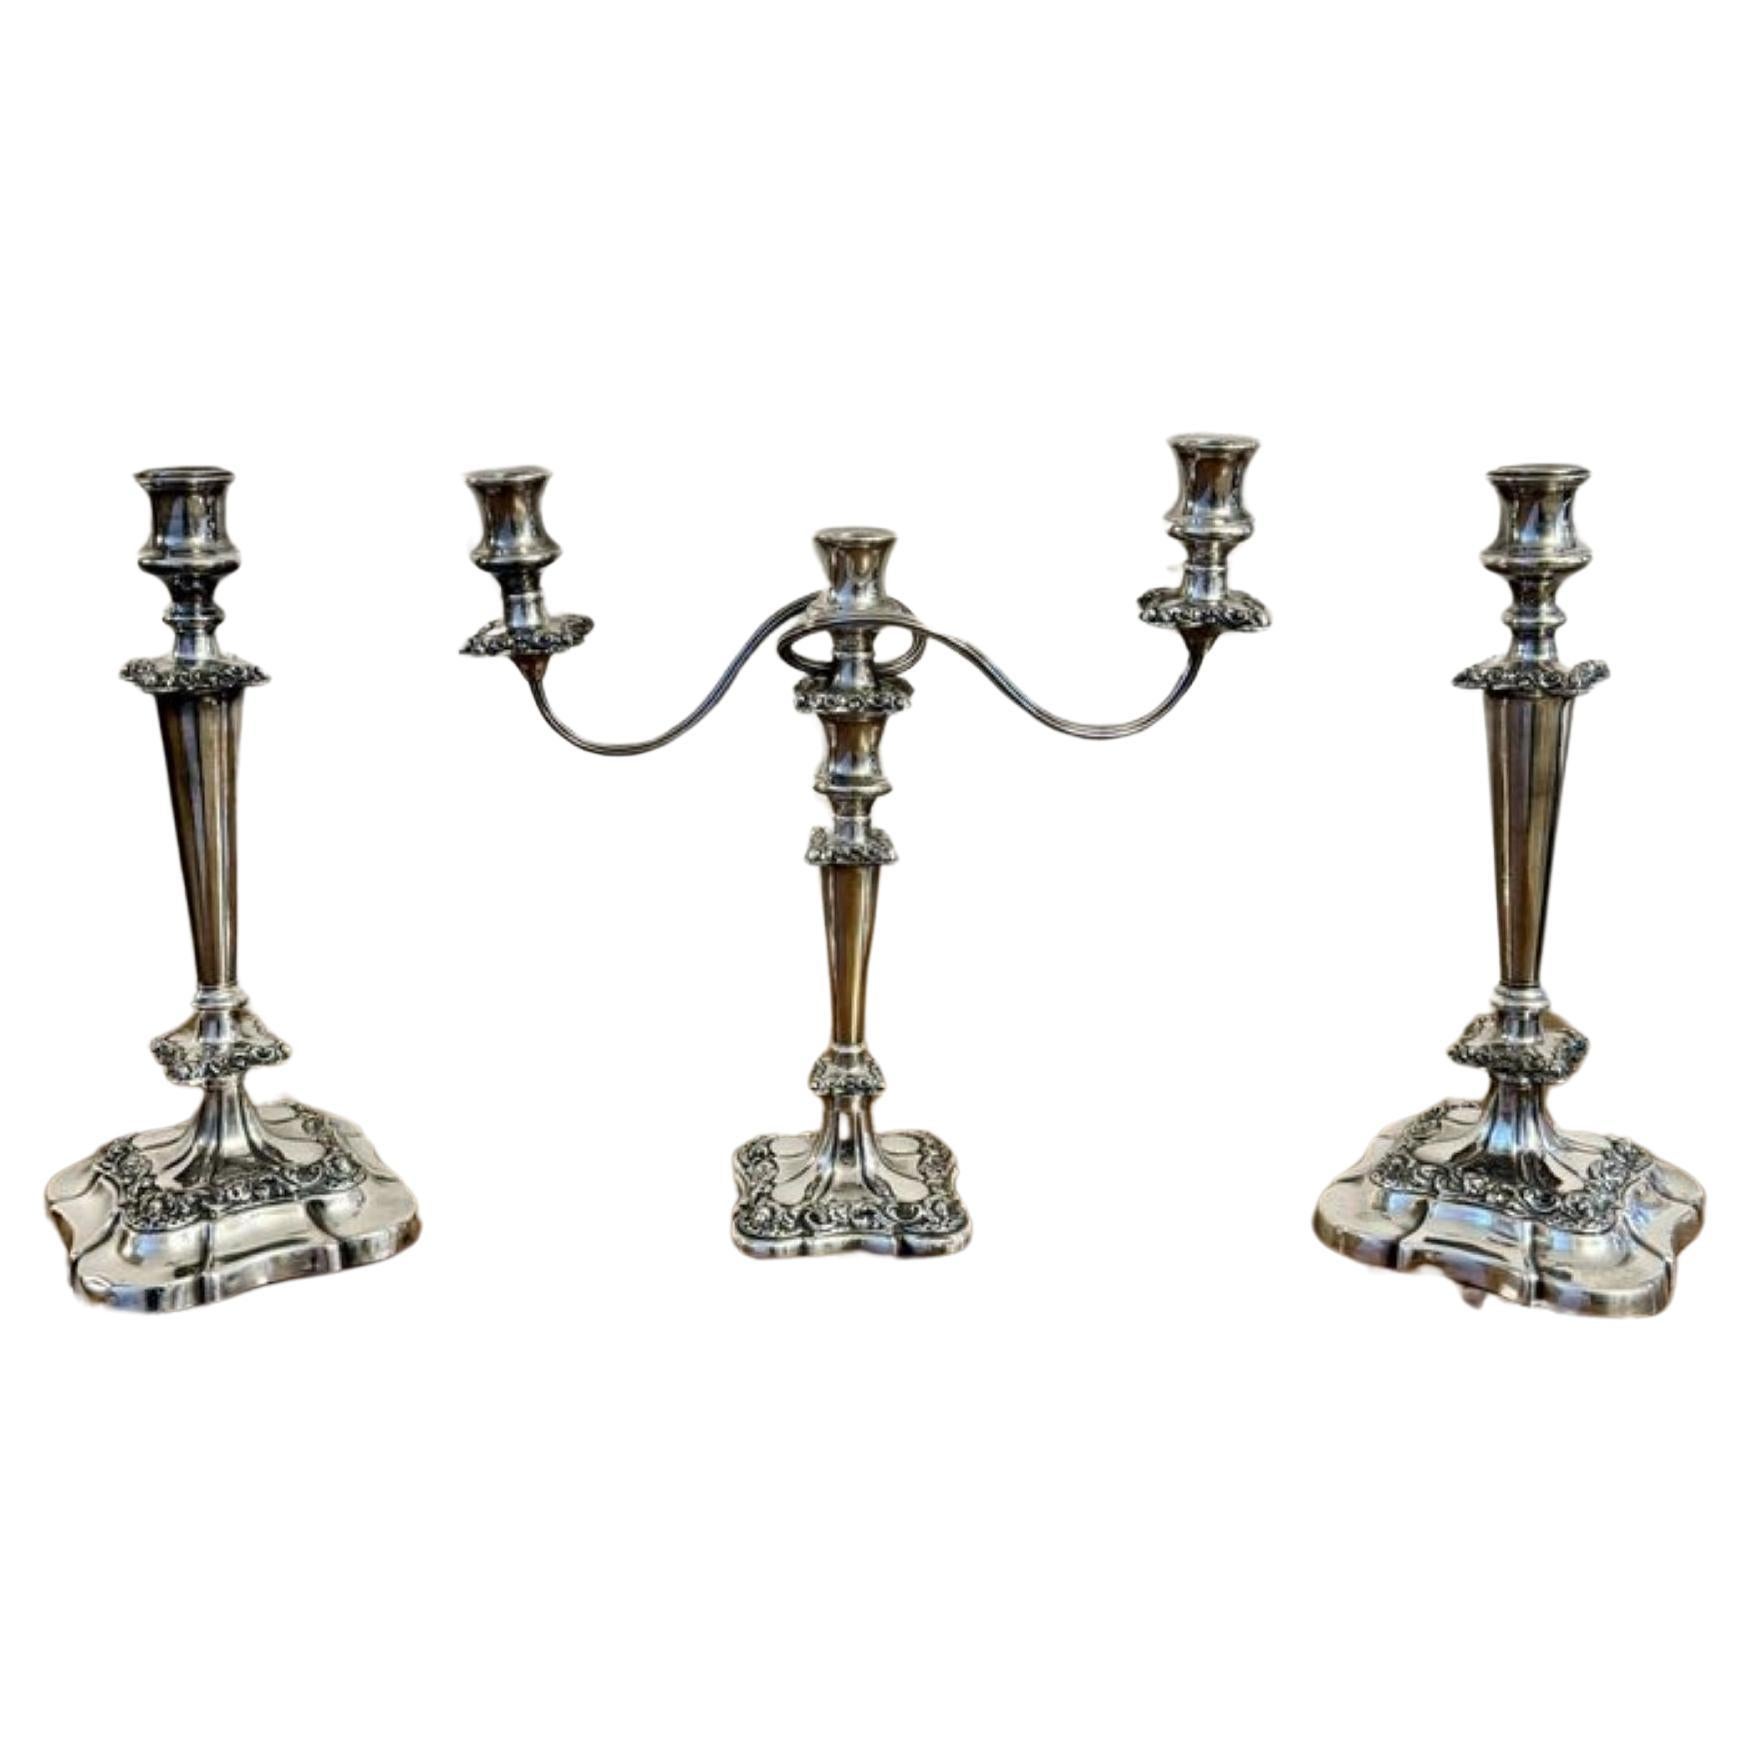 Outstanding quality antique Victorian ornate silver plated candelabra and candle For Sale